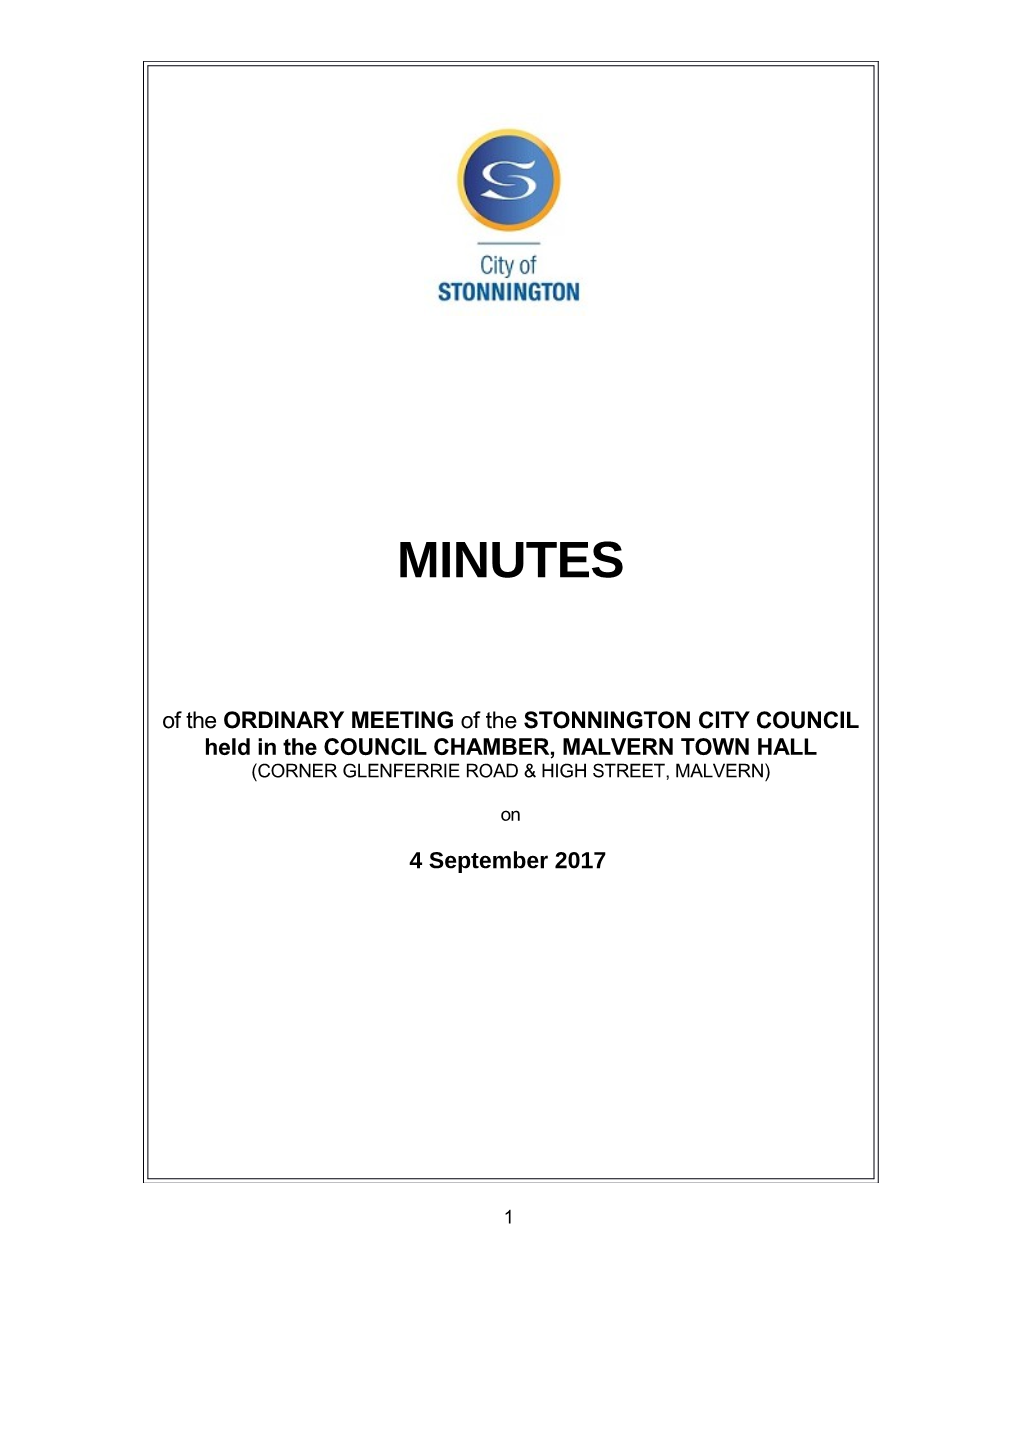 Minutes of Council Meeting - 4 September 2017